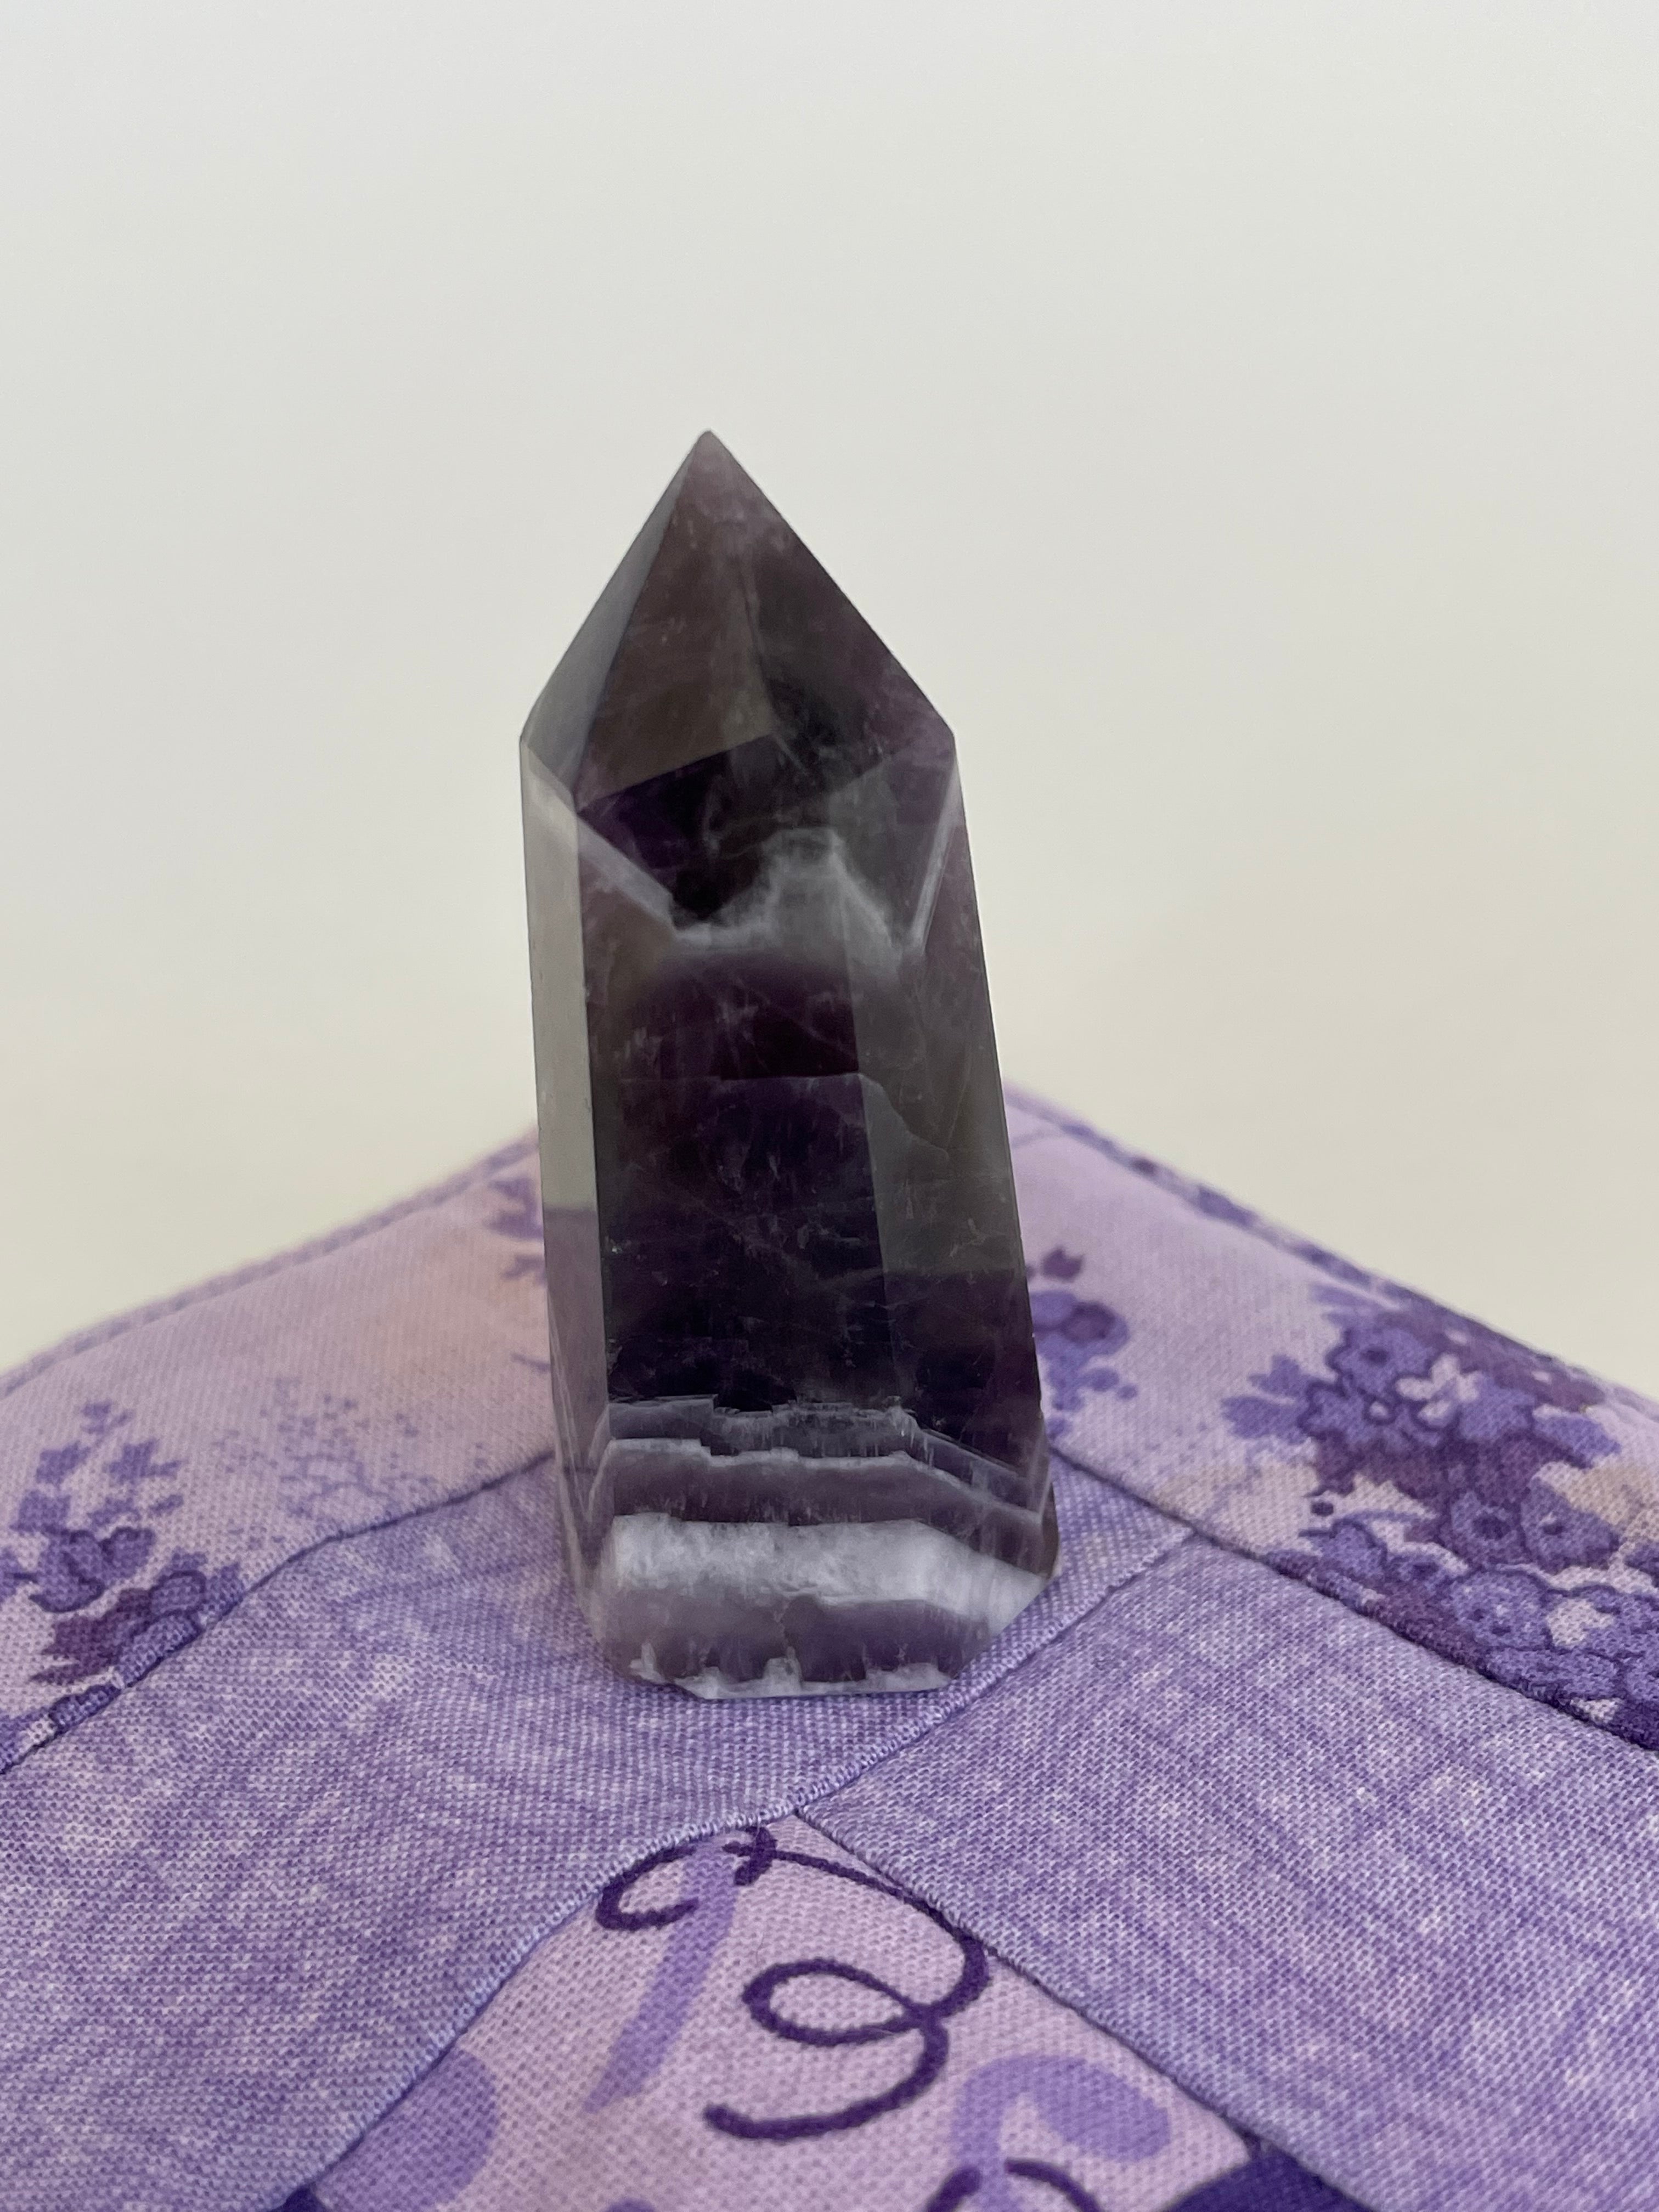 Alternate view. Chevron amethyst tower with the coolest banding for your altar, for healing or as décor for any room in your home or office. Amethyst, one of the most spiritual gemstones, heals, cleanses & calms, allowing you to reach meditative & higher consciousness levels more easily. It also helps to dispel negative emotional states and more. Chevron amethyst is a combination of amethyst and white quartz and when you add the quartz you get additional qualities. 2" long. Cost is $9.